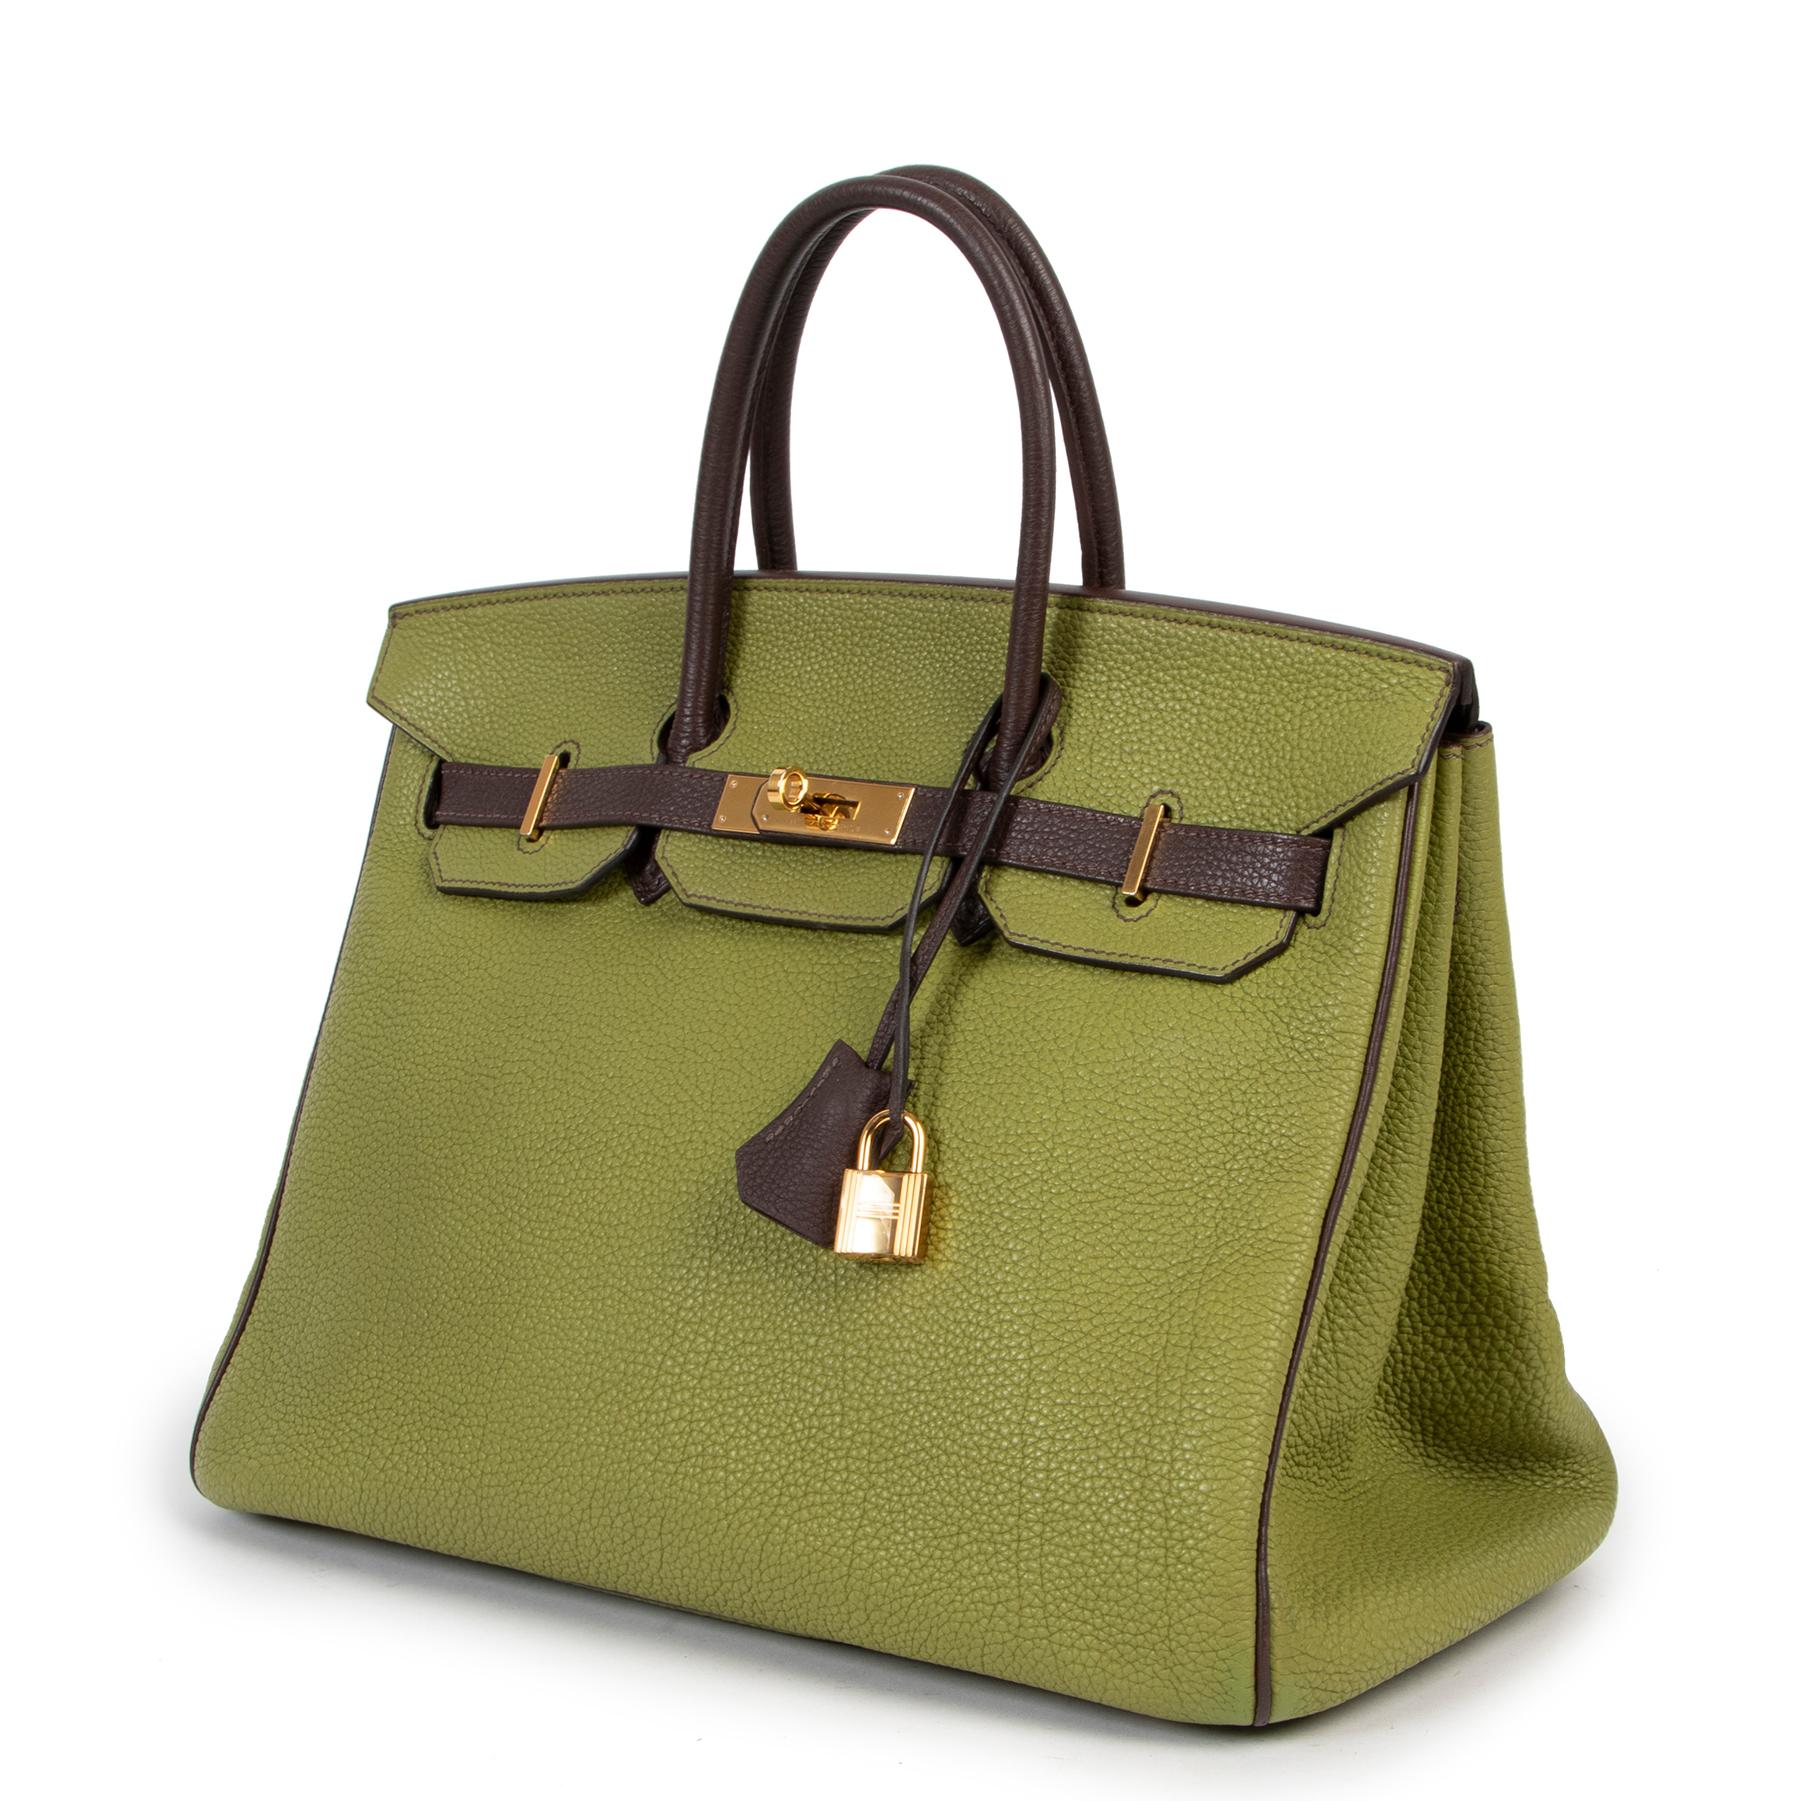 Hermès Birkin 35 Vert Anis Apple Marron Togo GHW

This Birkin is a special order, a HSS horseshoe Birkin.

This stunning Hermès Birkin comes in a delicious combo of Vert Anis Apple Pomme and chocolate brown Marron togo leather. This beautiful bag is